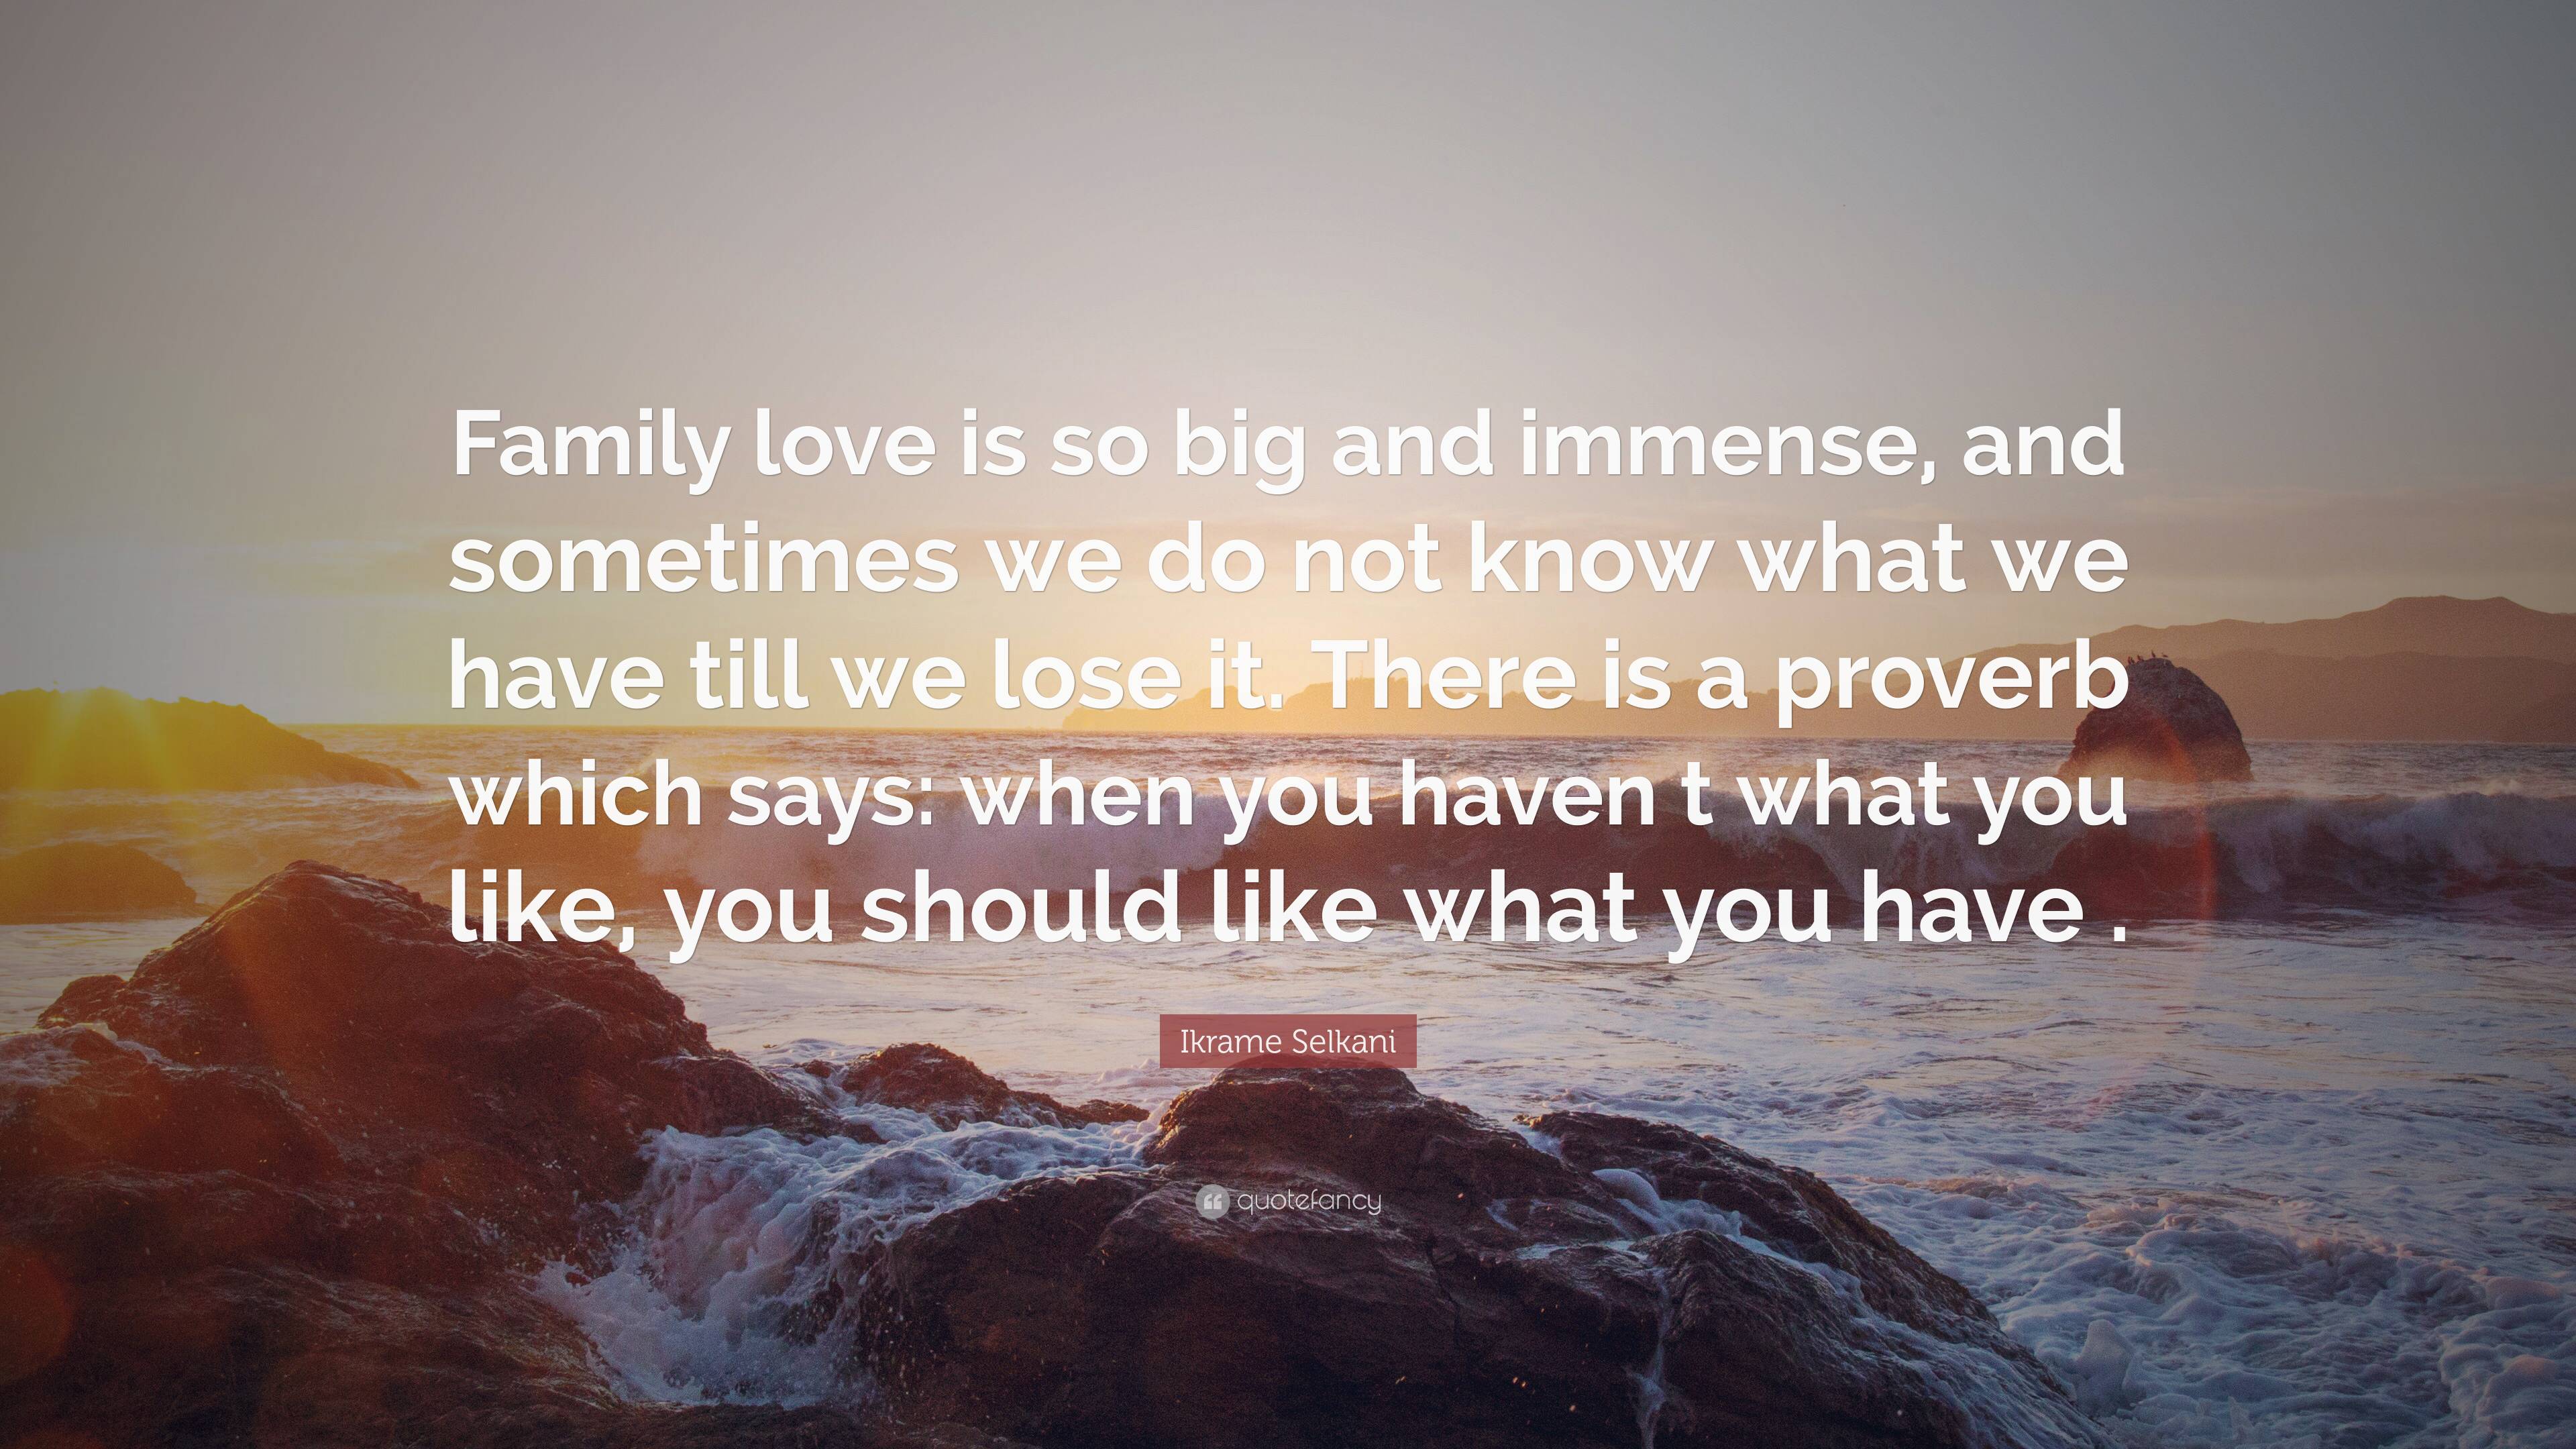 Ikrame Selkani Quote: “Family love is so big and immense, and sometimes ...